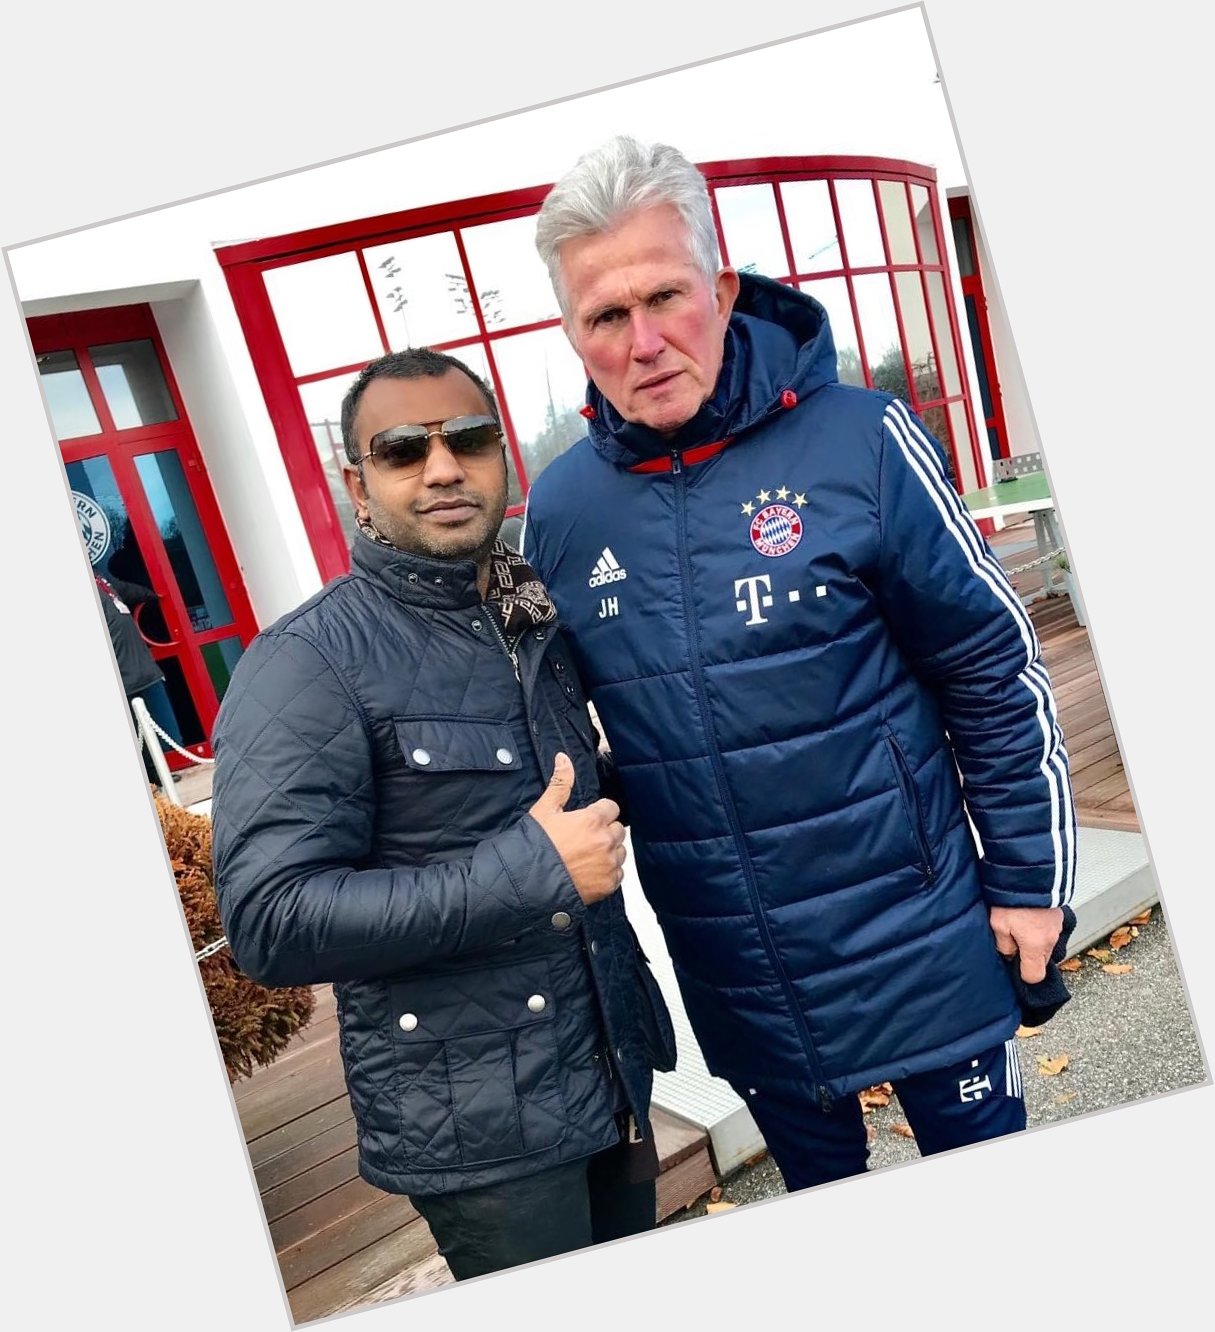 Happy birthday to Legend, Jupp Heynckes and many more years with good health  